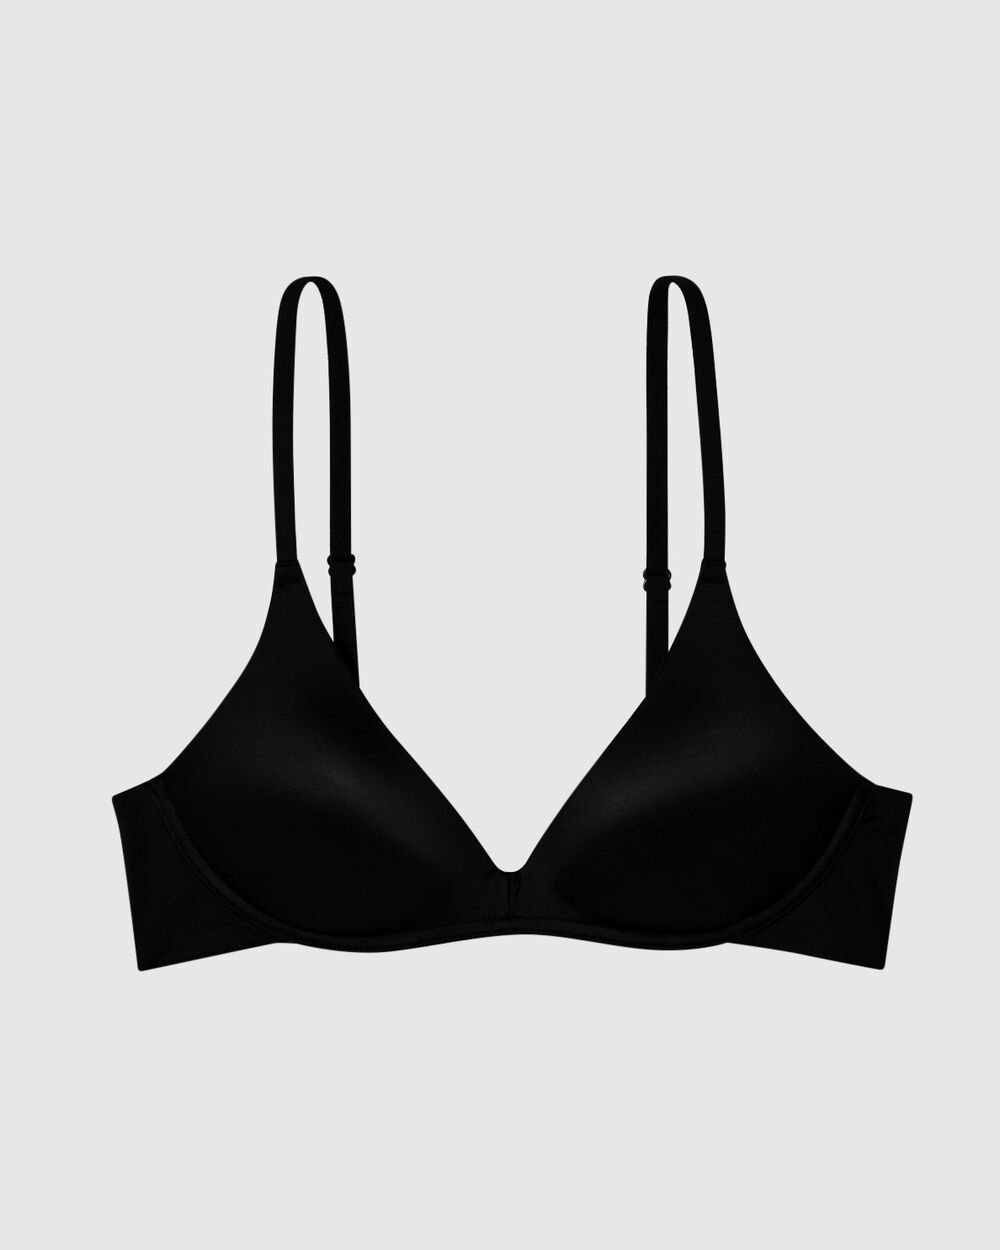 Clearance Promotion Women Push Up Bra For Small Breast Women Double Push Up Bras  Size Push Up Bra Sexy Push Up Bra Silicone Underwear Gather Gray 75 